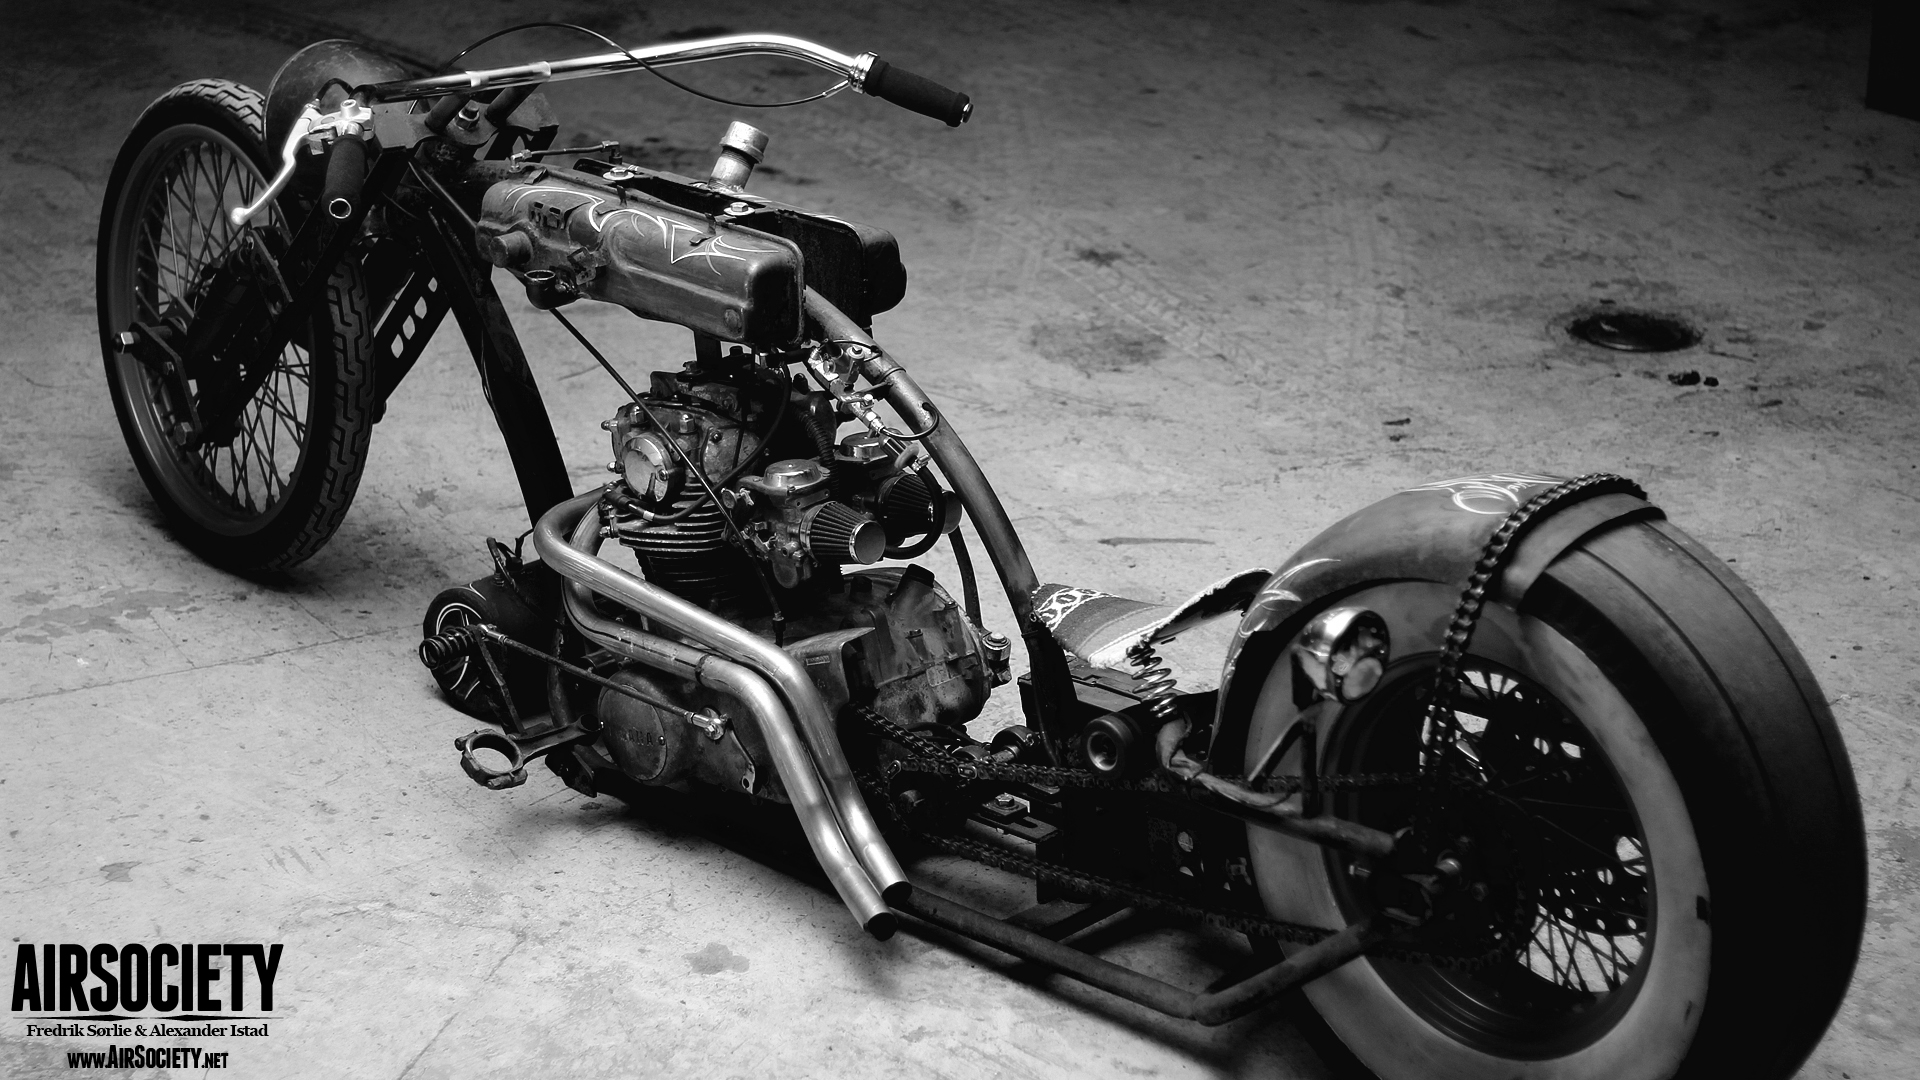 Cool Motorcyclez Rat Bikes Bobbers And Chopper